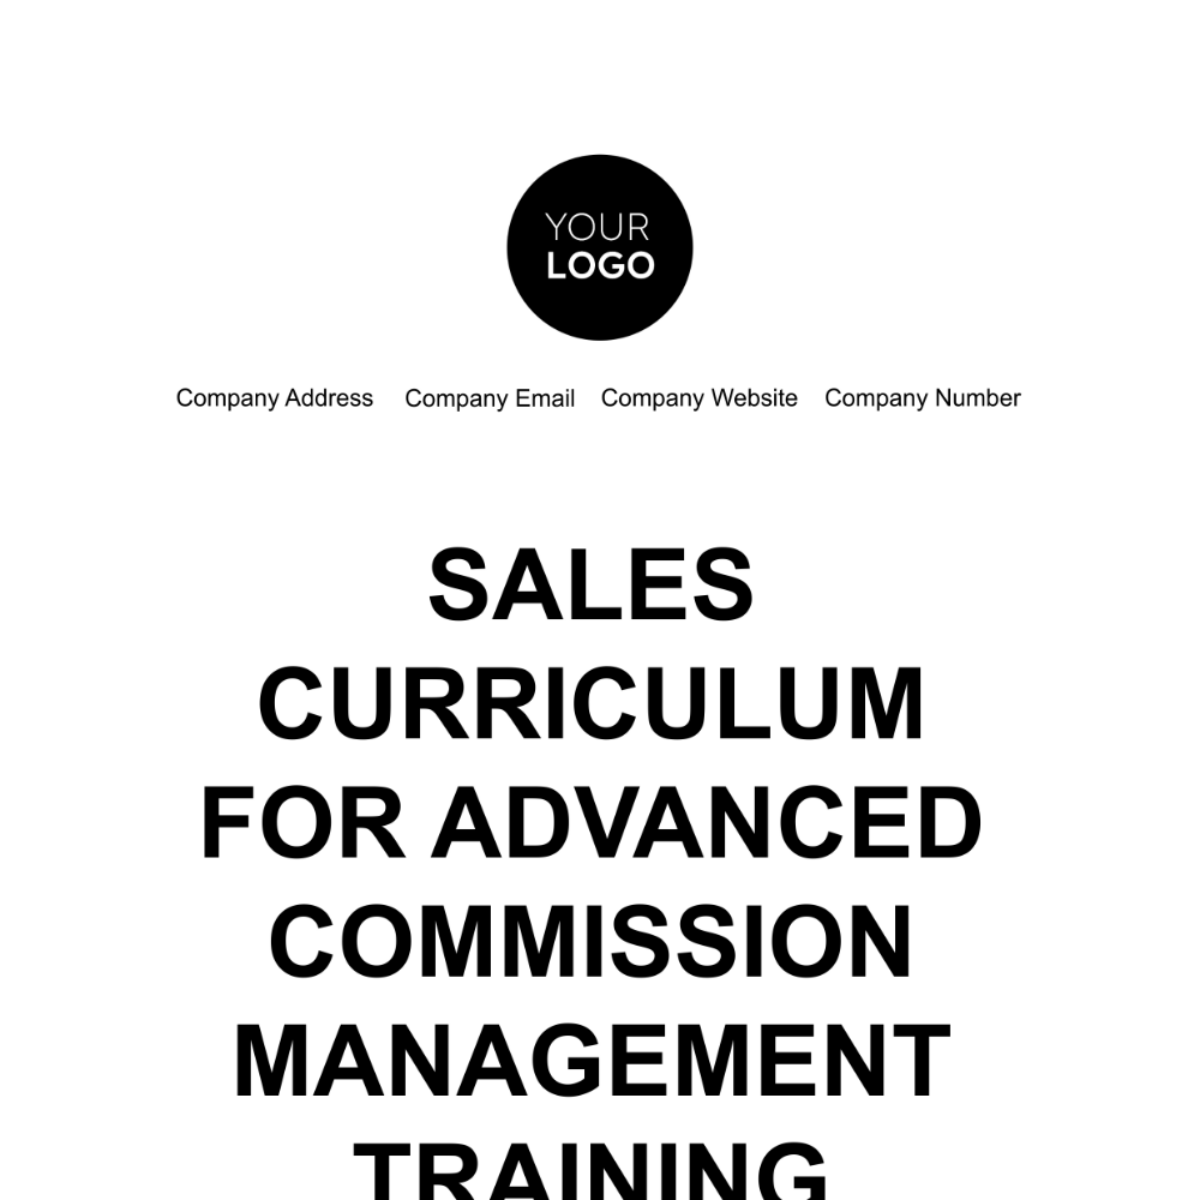 Sales Curriculum for Advanced Commission Management Training Template